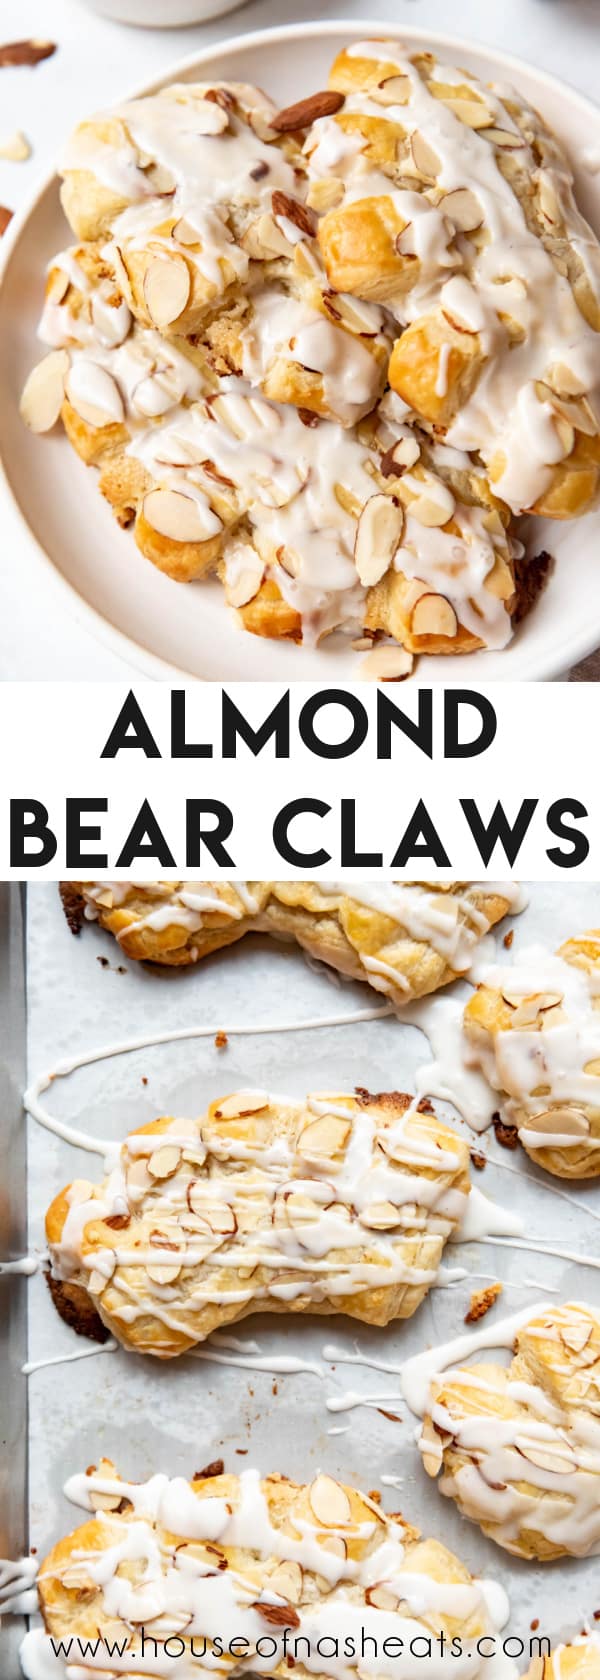 A collage of images of bear claw pastries with text overlay.